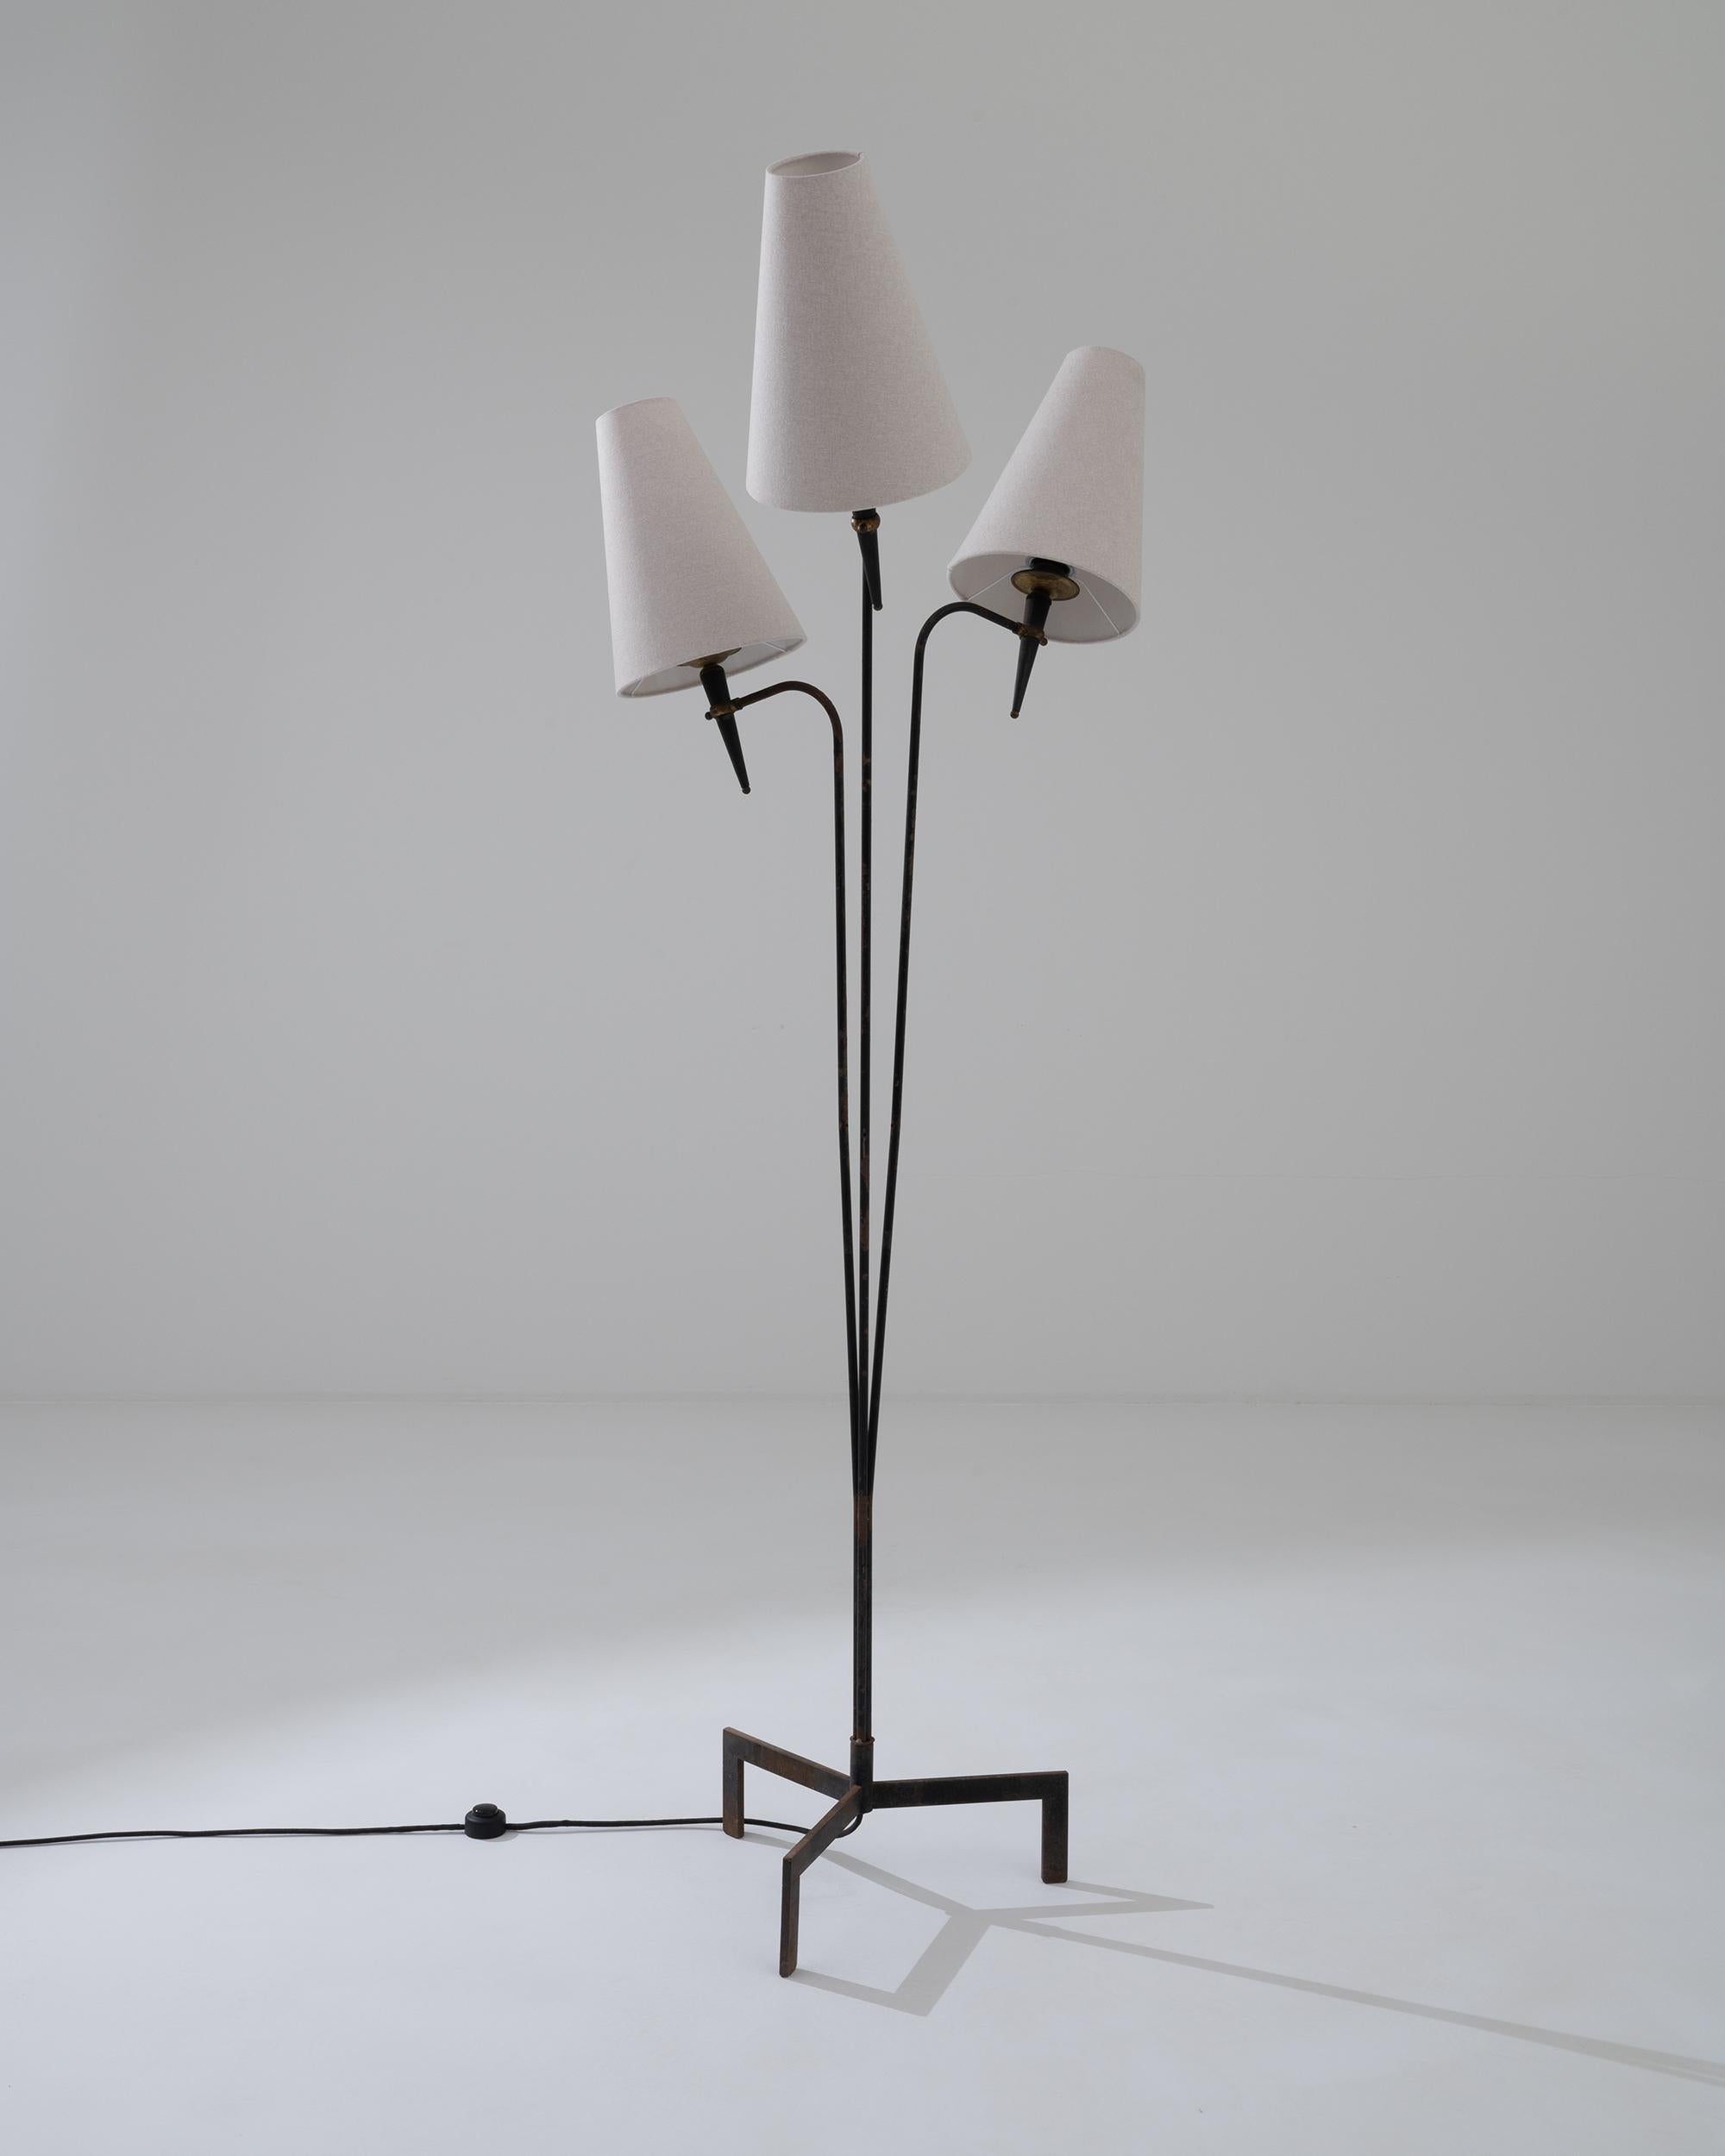 This distinctive floor lamp, designed in France during the 20th century, features a unique tripod structure with three lights that playfully emerge from a three-legged metal base. The triangle-shaped white lampshades are supported by gracefully